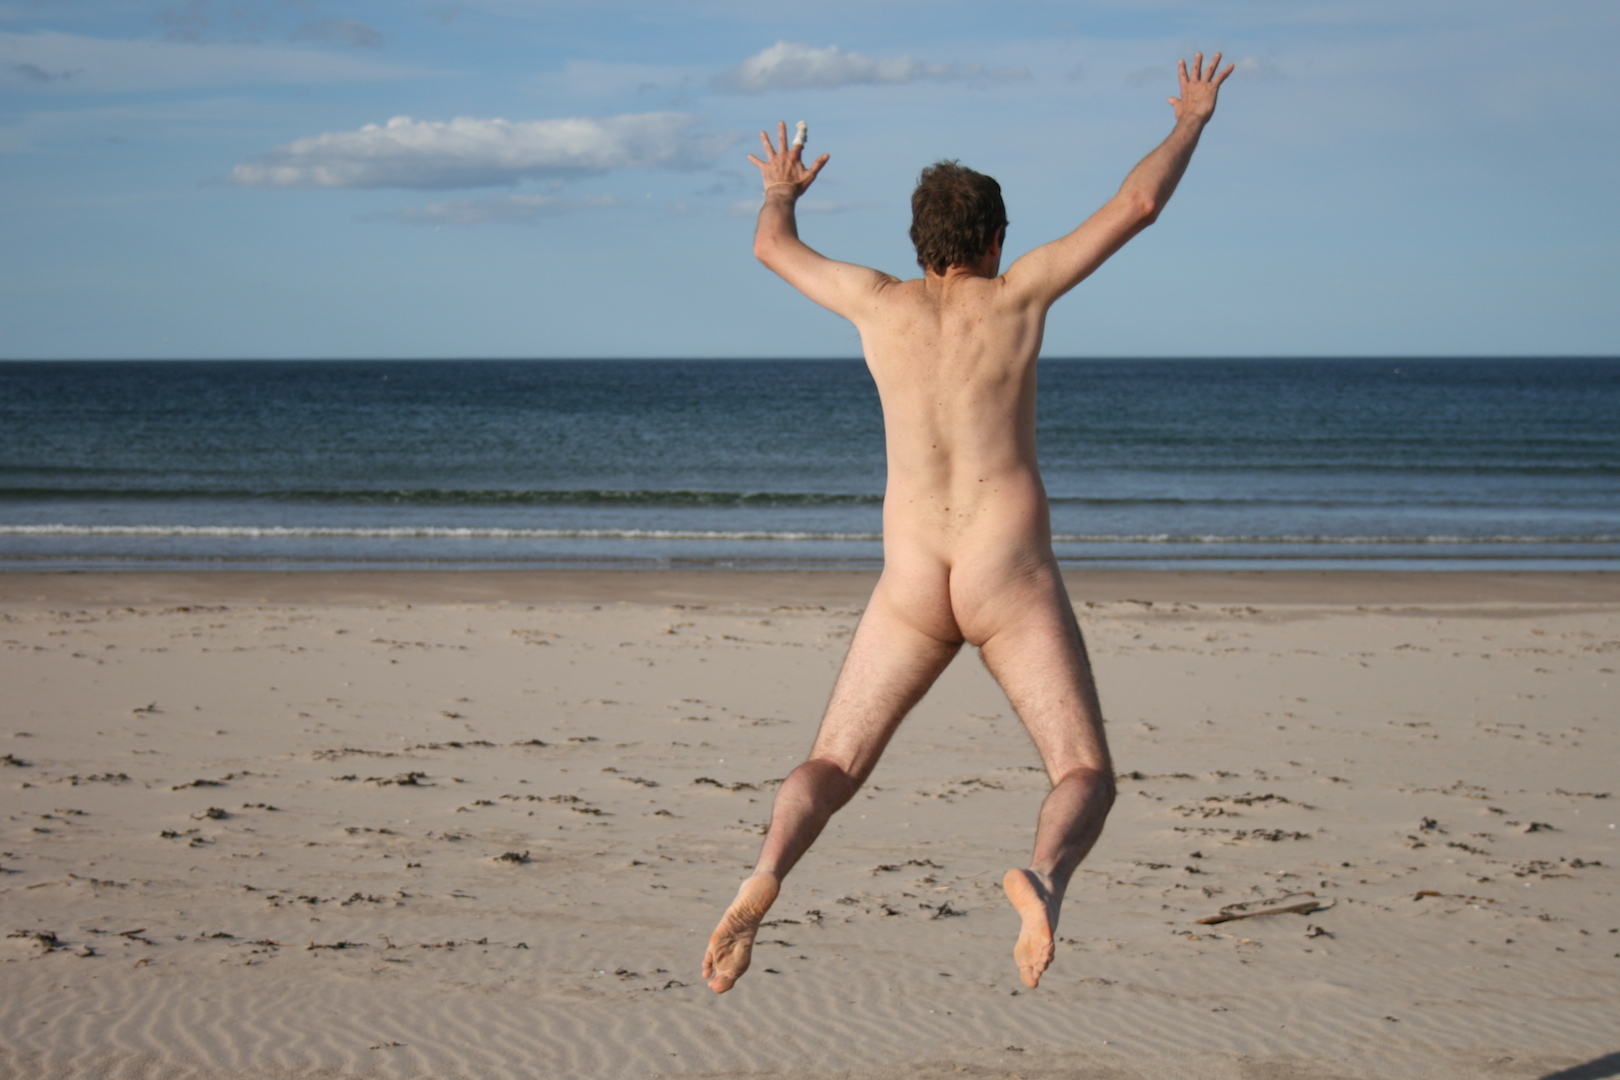 Mark Haskell Smith talks about his research into nudism for his new book &a...